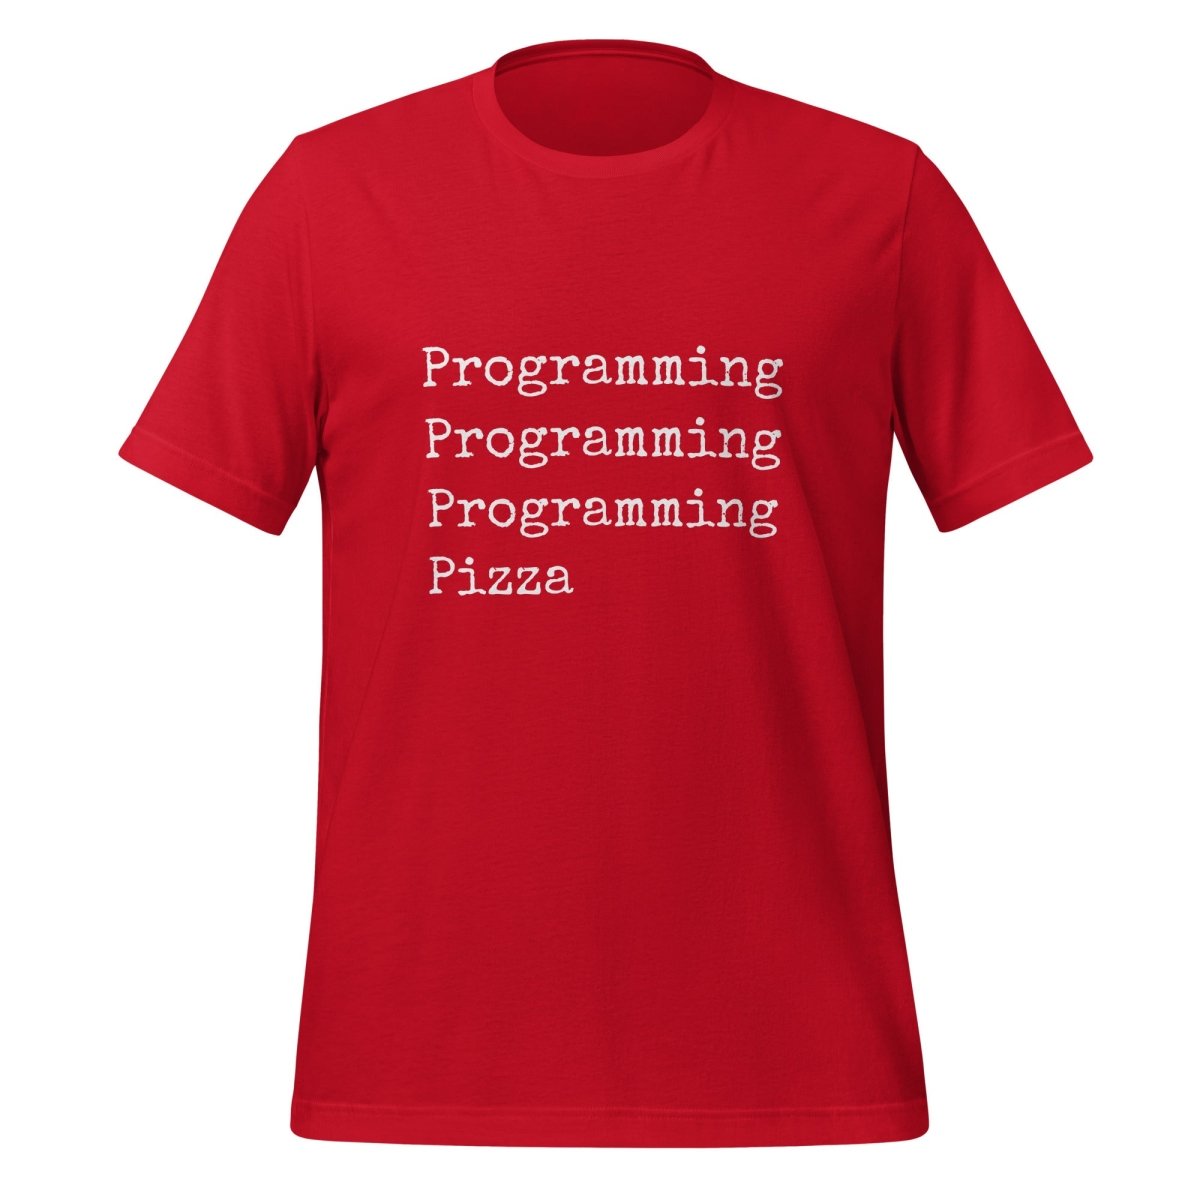 Programming & Pizza T - Shirt (unisex) - Red - AI Store